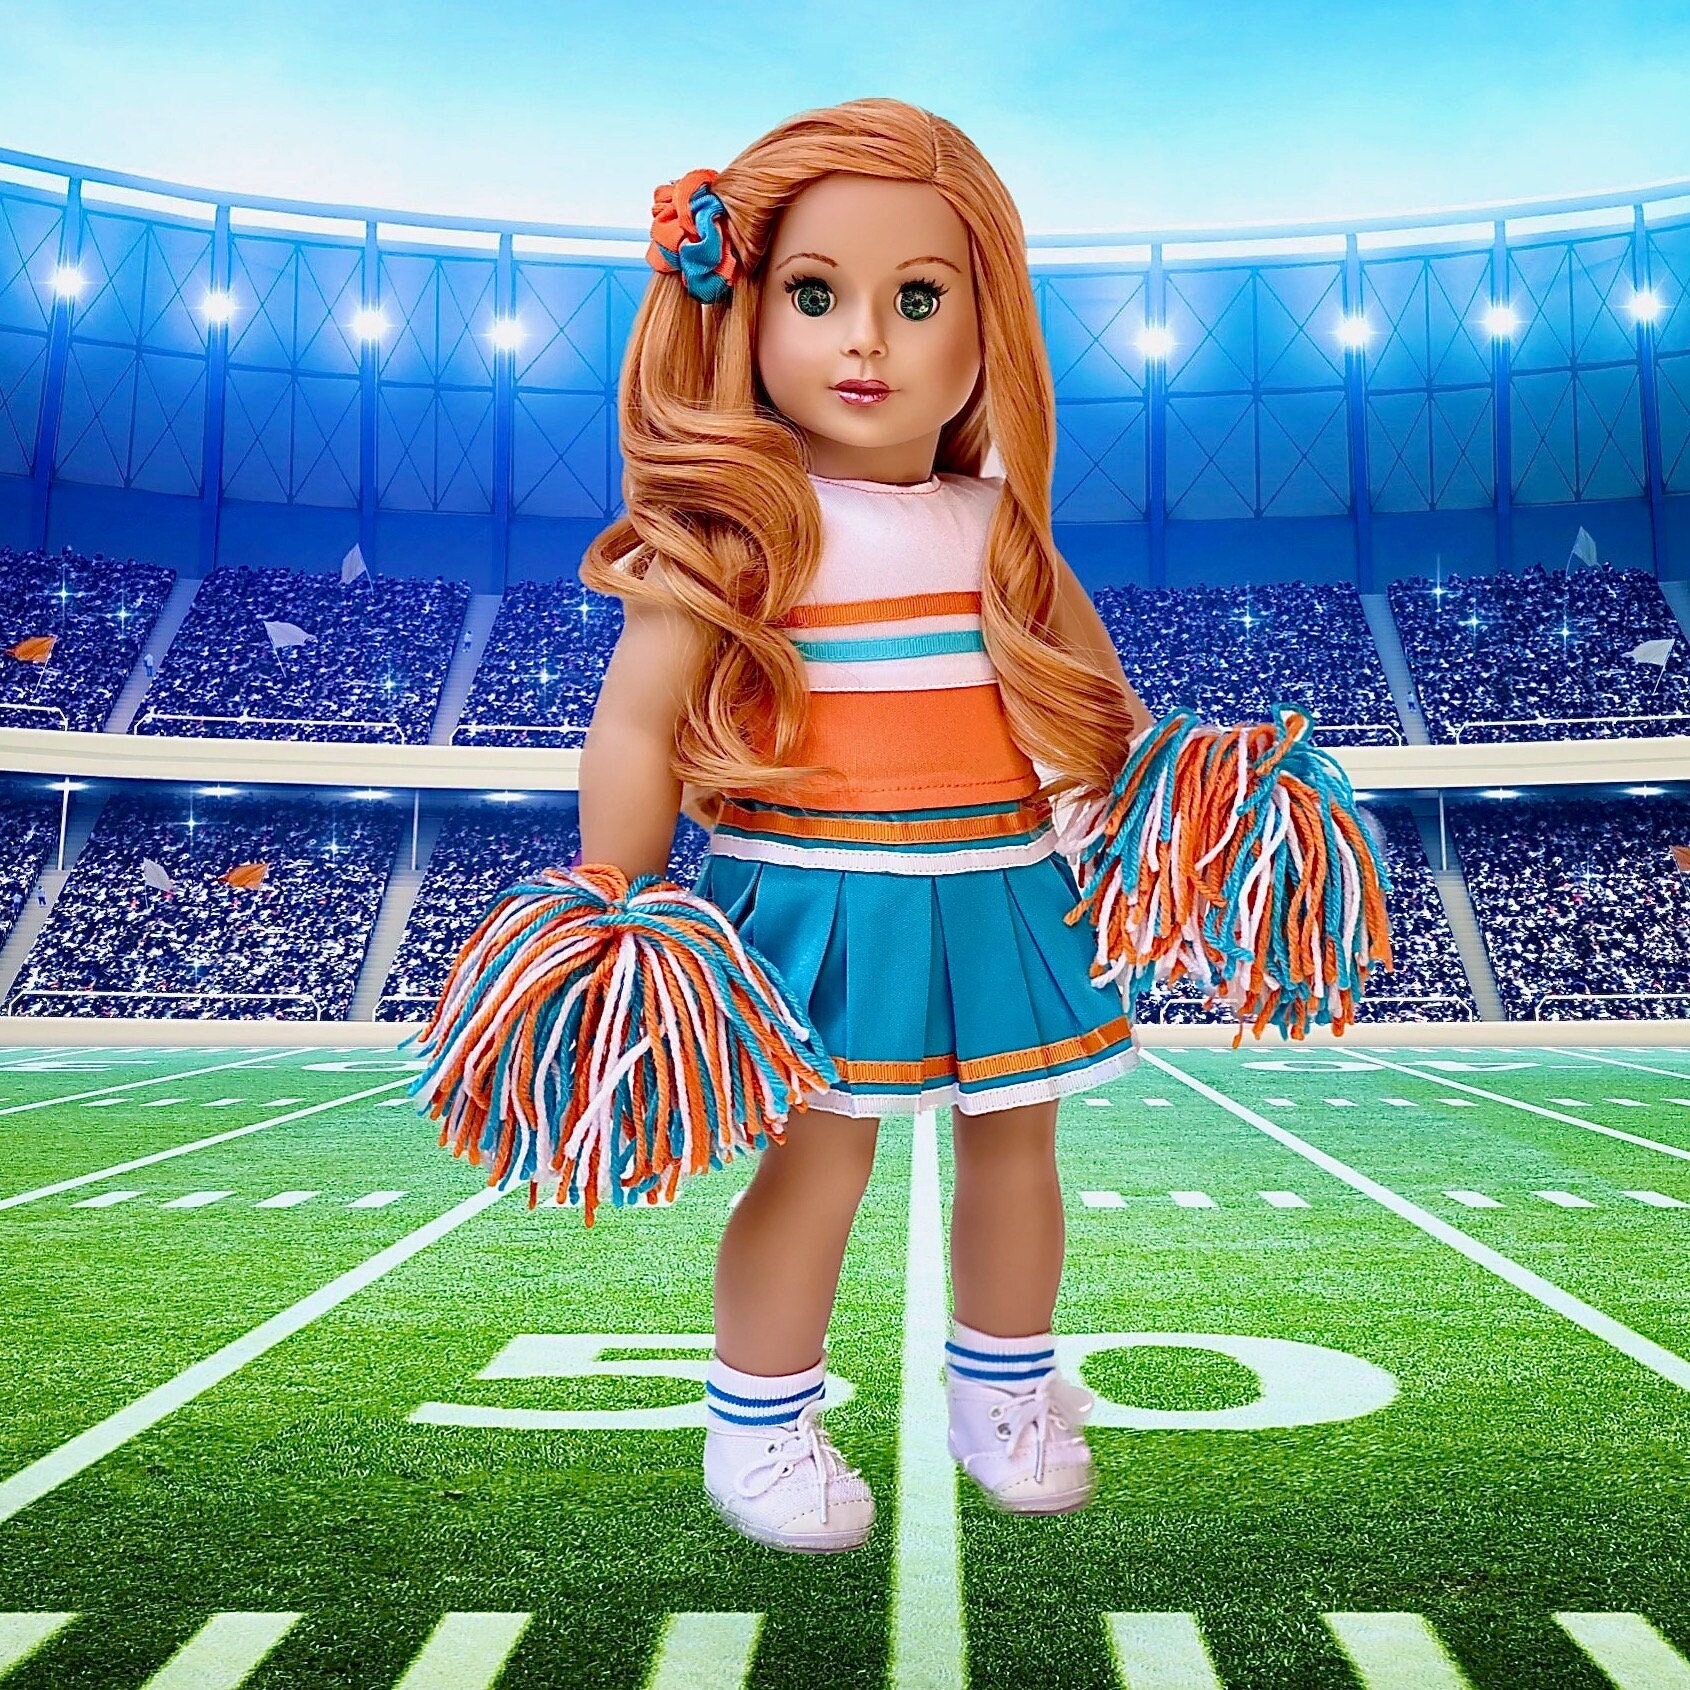 Cheerleader Doll Clothes for 18 Inch Doll 6 Piece Outfit Blouse, Skirt,  Headband, Pompons, Socks and Shoes -  Canada